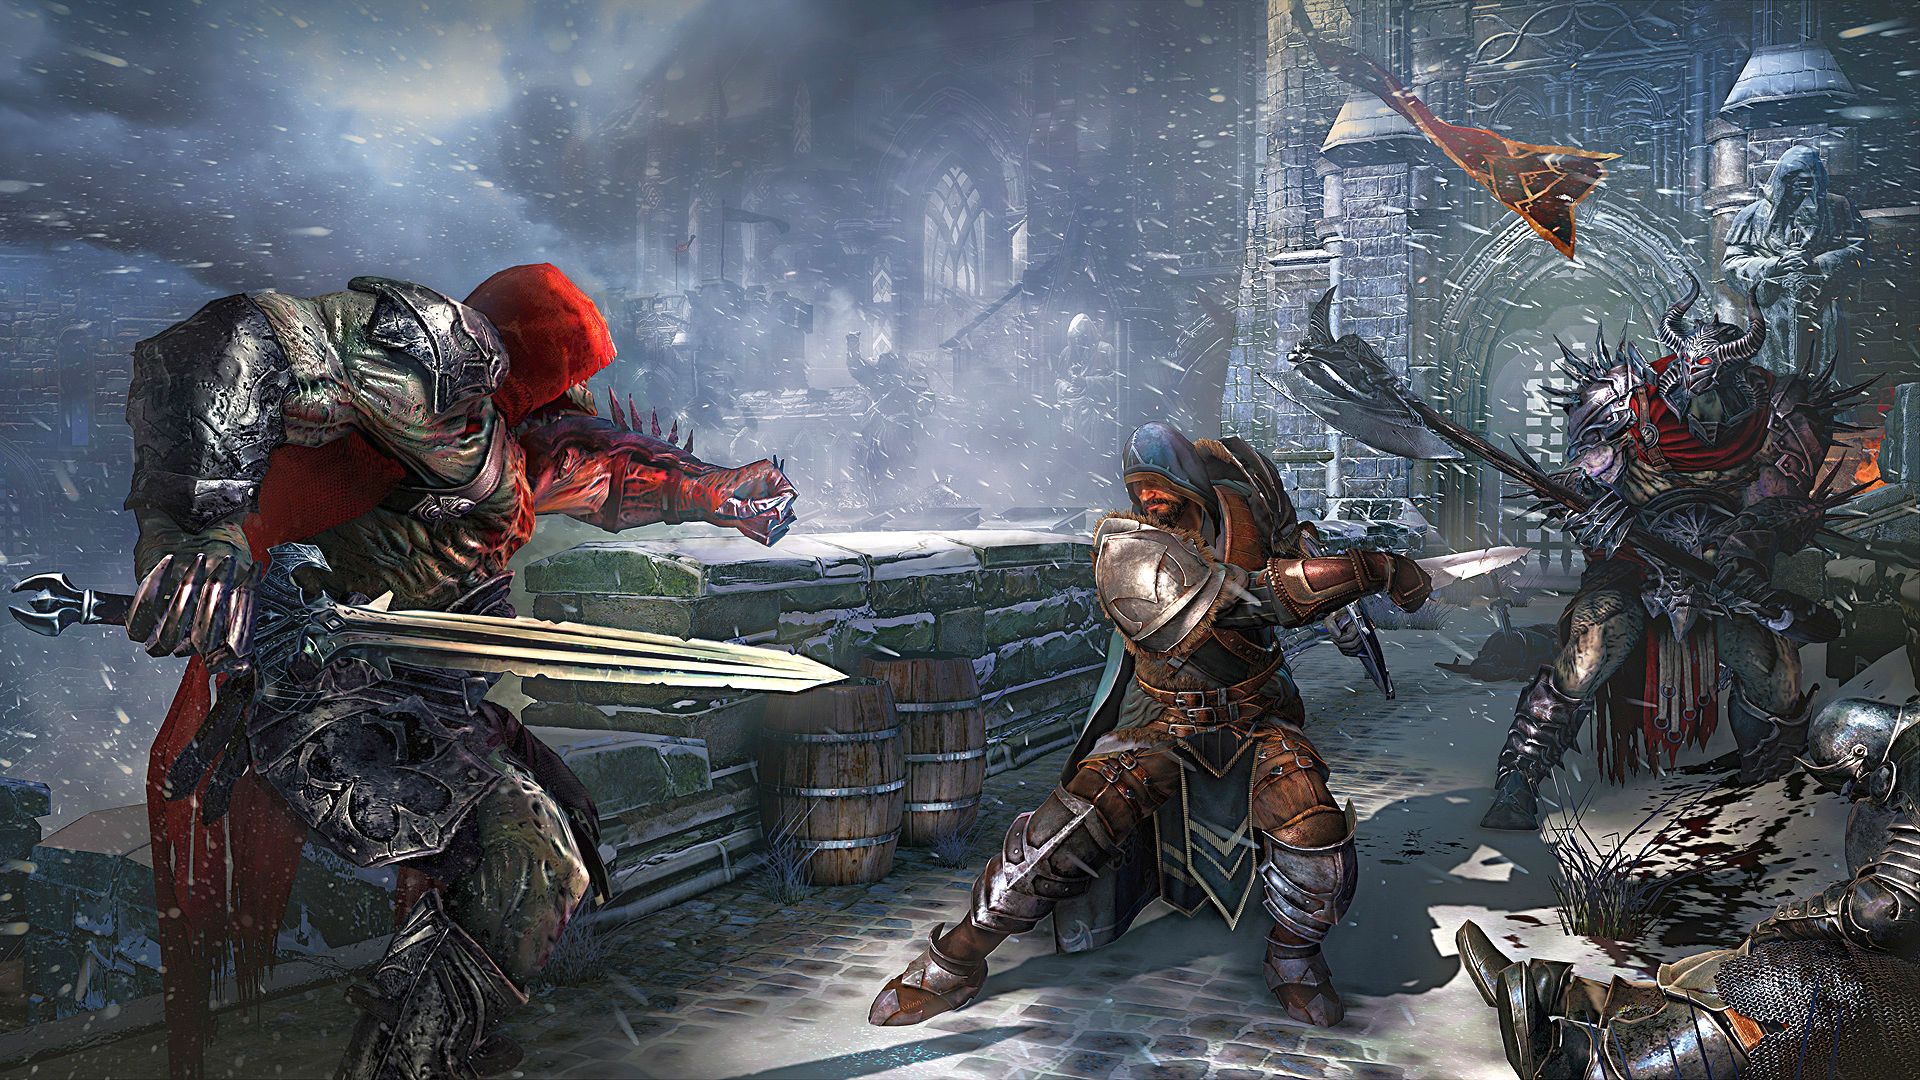 Lords of the Fallen 2 is back as CI Games starts a new studio just